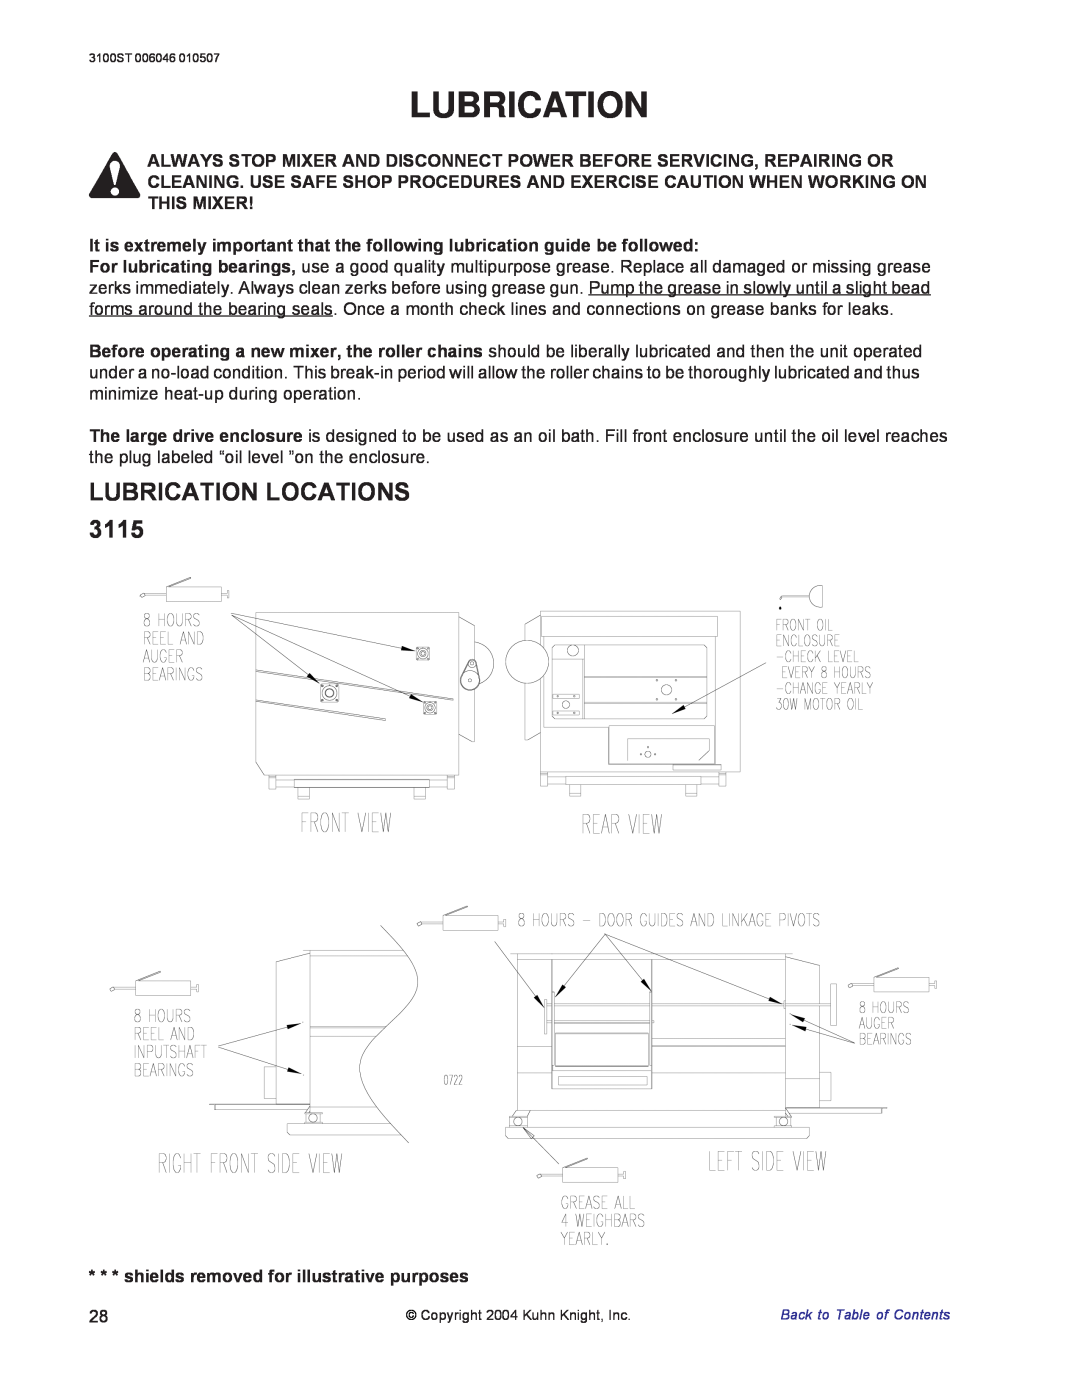 Kuhn Rikon 3100 instruction manual Lubrication Locations, shields removed for illustrative purposes 